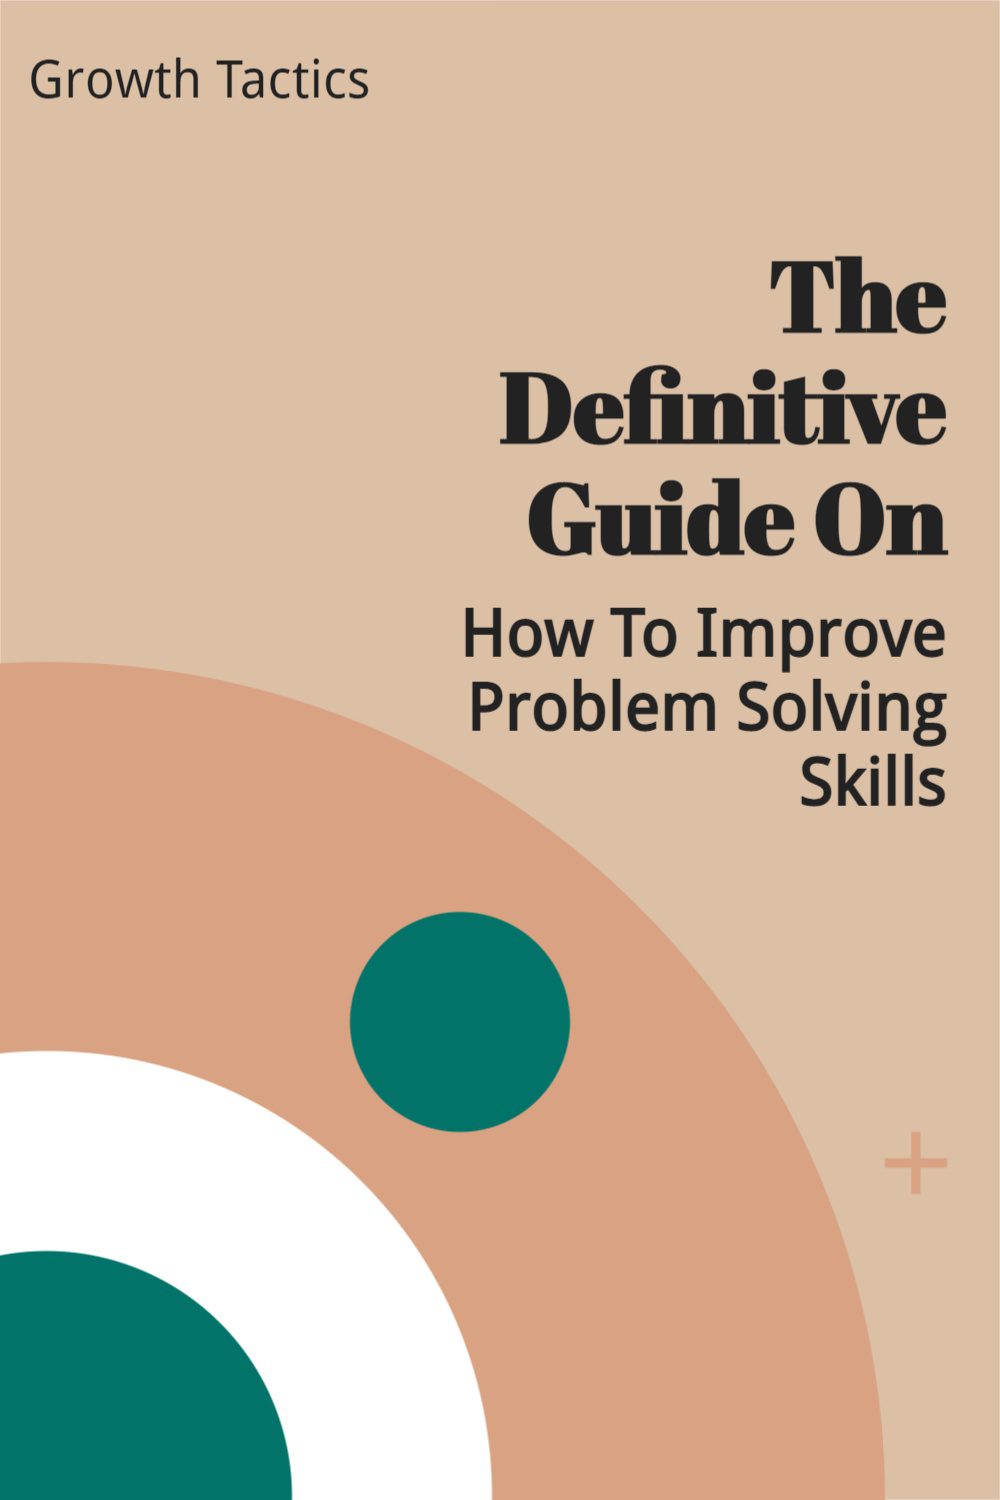 The Definitive Guide On How To Improve Problem Solving Skills